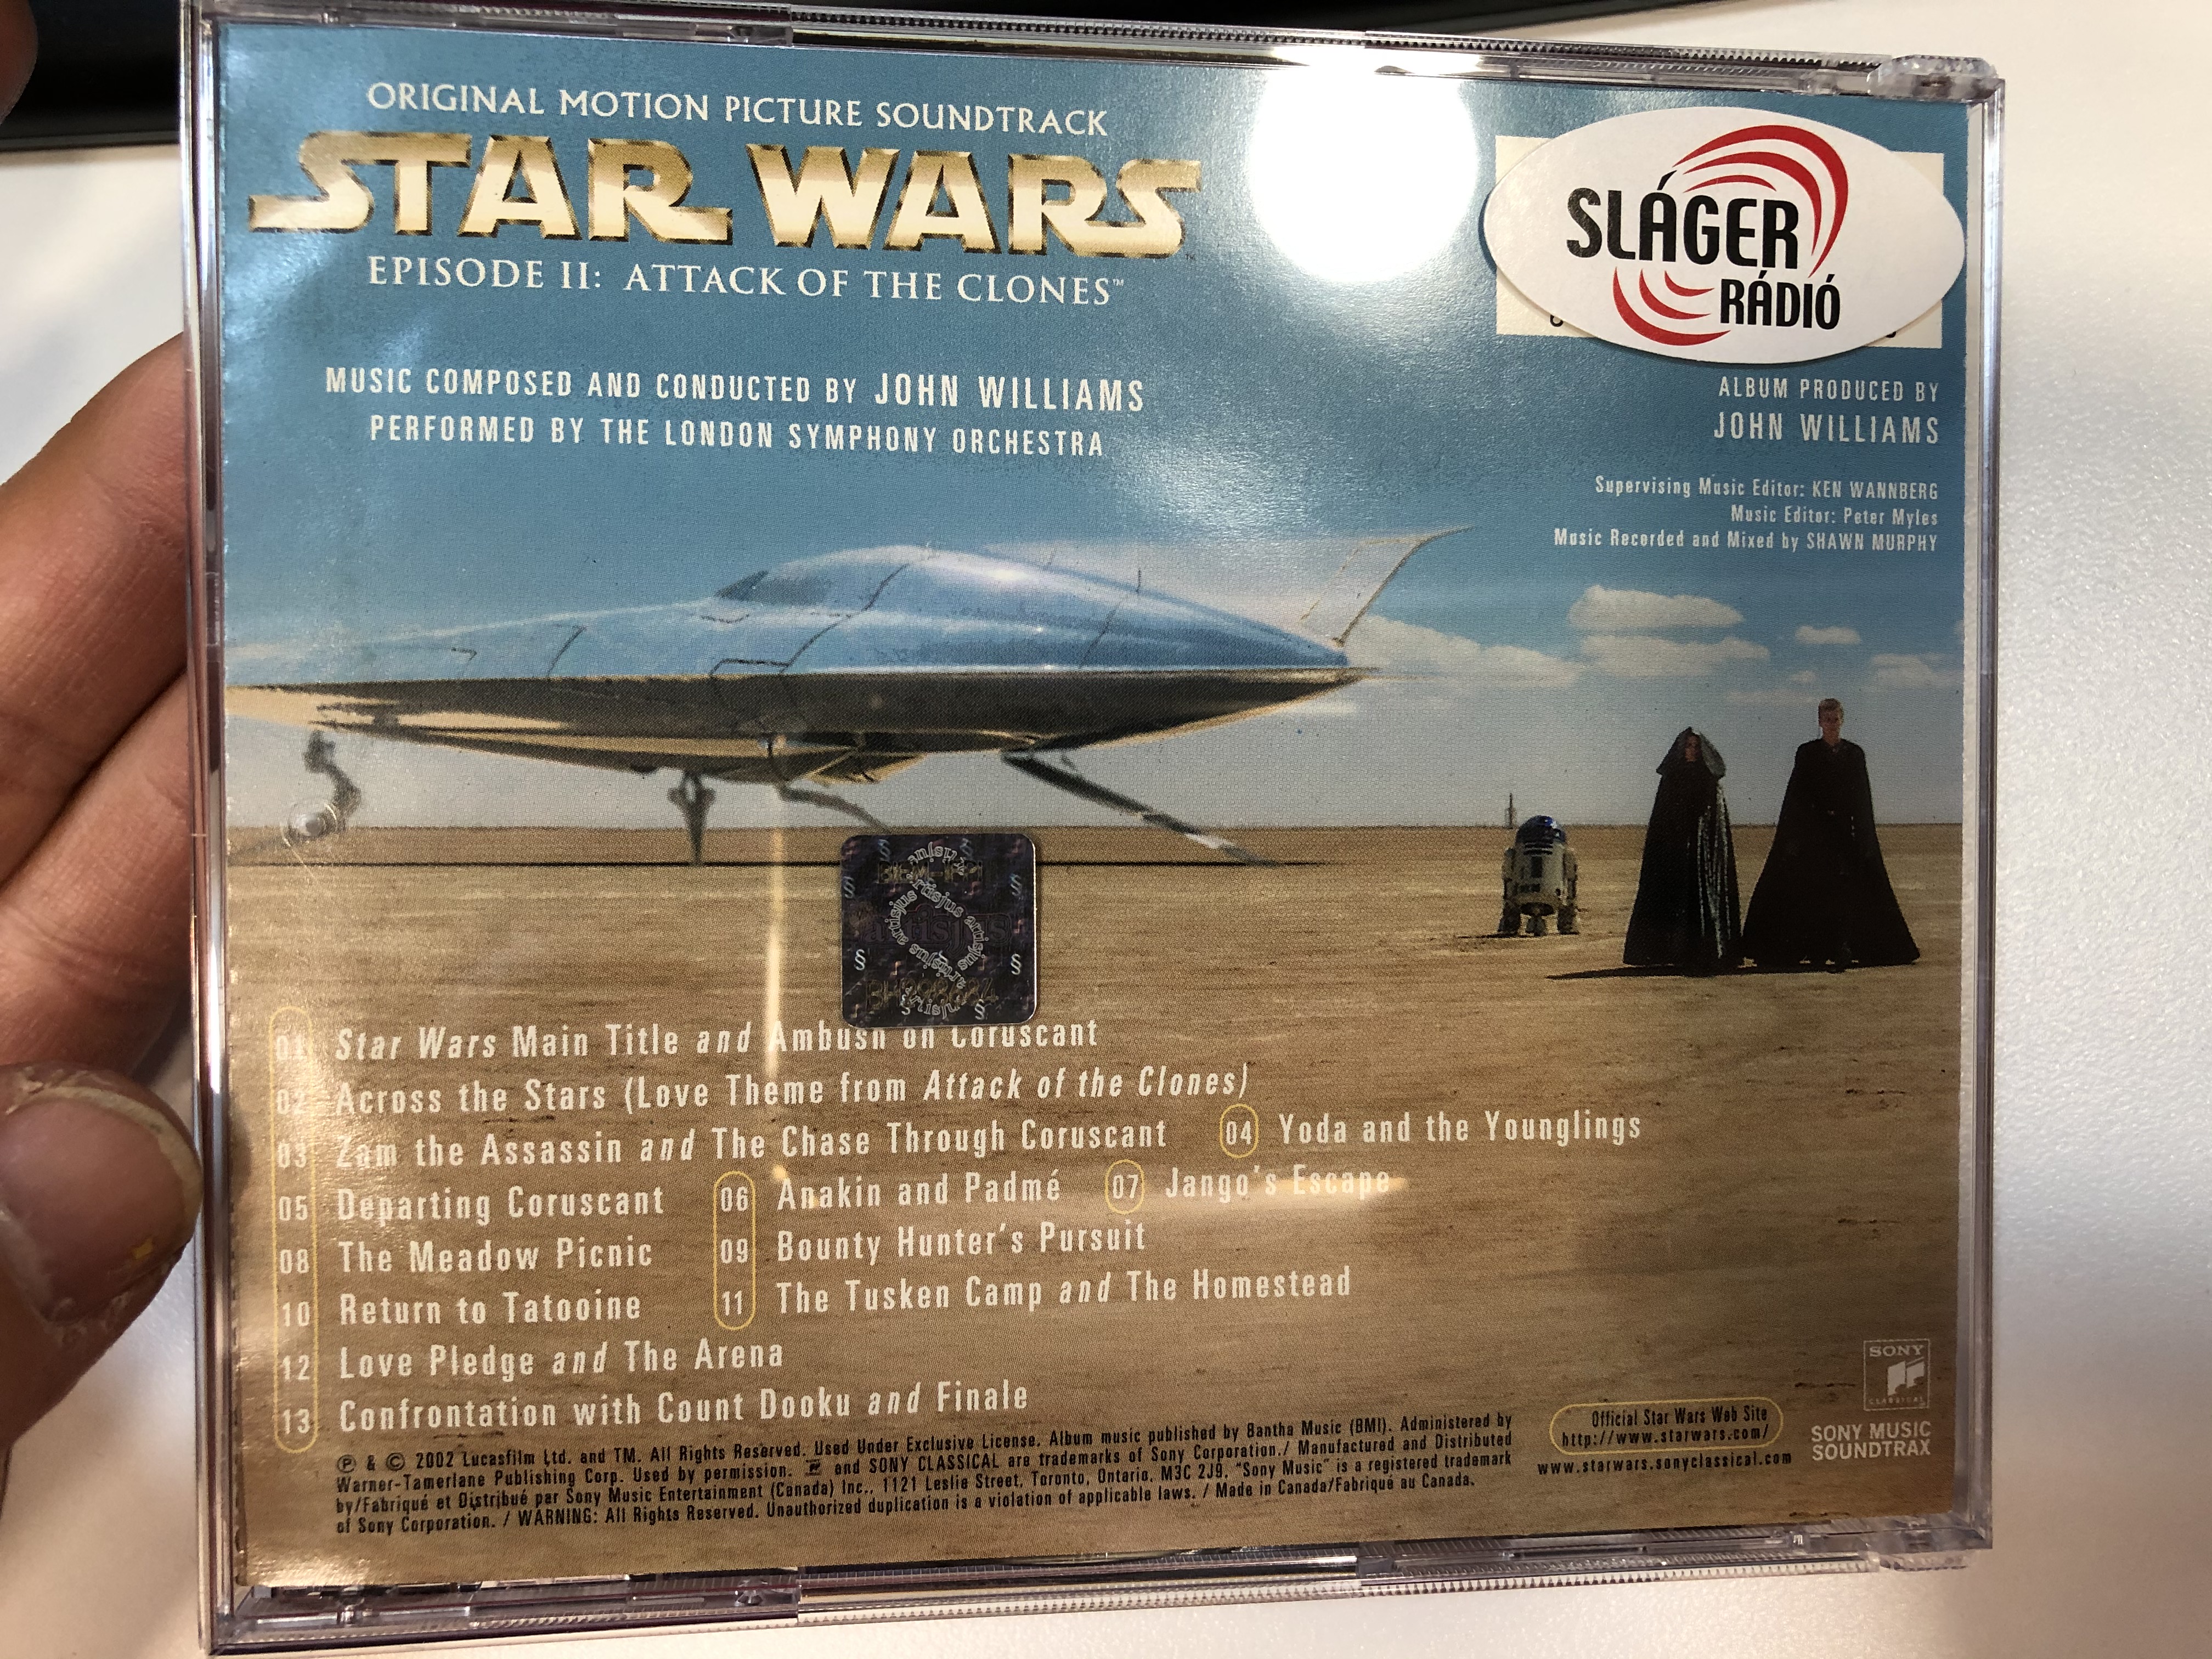 star-wars-episode-ii-attack-of-the-clones-original-motion-picture-soundtrack-music-composed-and-conducted-by-john-williams-sony-classical-audio-cd-2002-sk-89932-4-.jpg